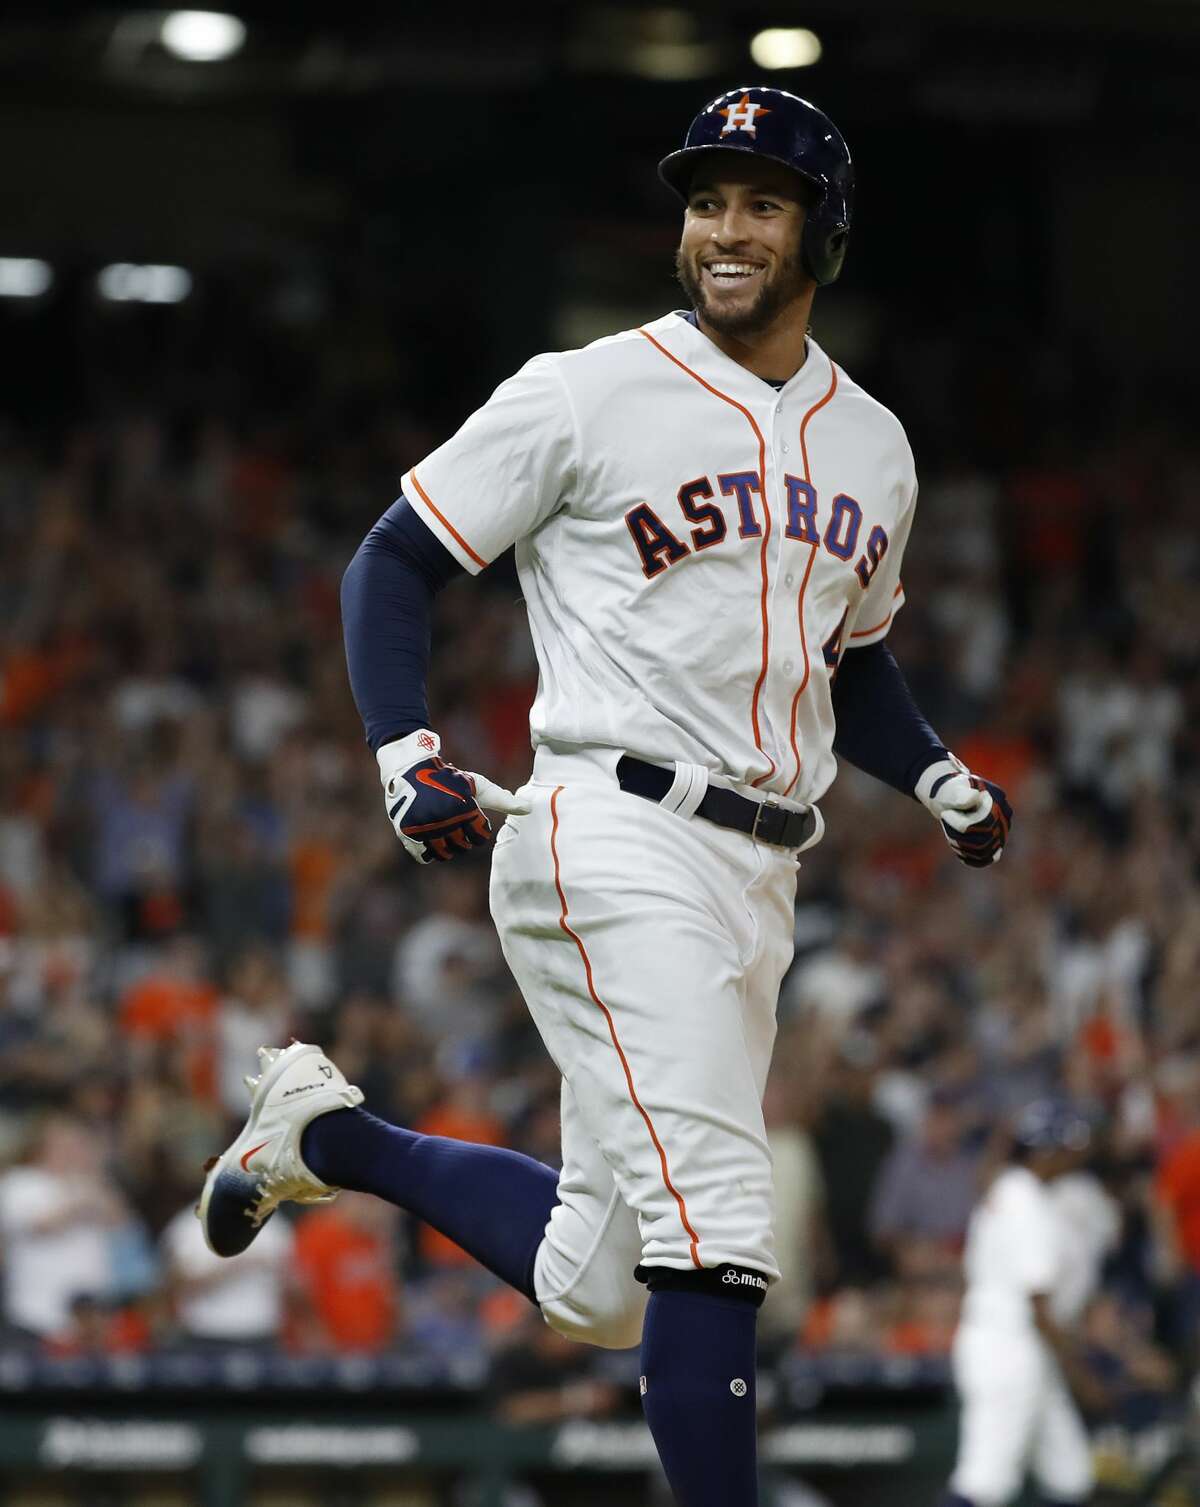 HOUSTON ASTROS WALK-UP SONGS George Springer Current song: No Cap (Future/Young Thug) Listen here Previous songs this season: Butterfly Effect (Travis Scott) Listen here Three Little Birds (Bob Marley) Listen here